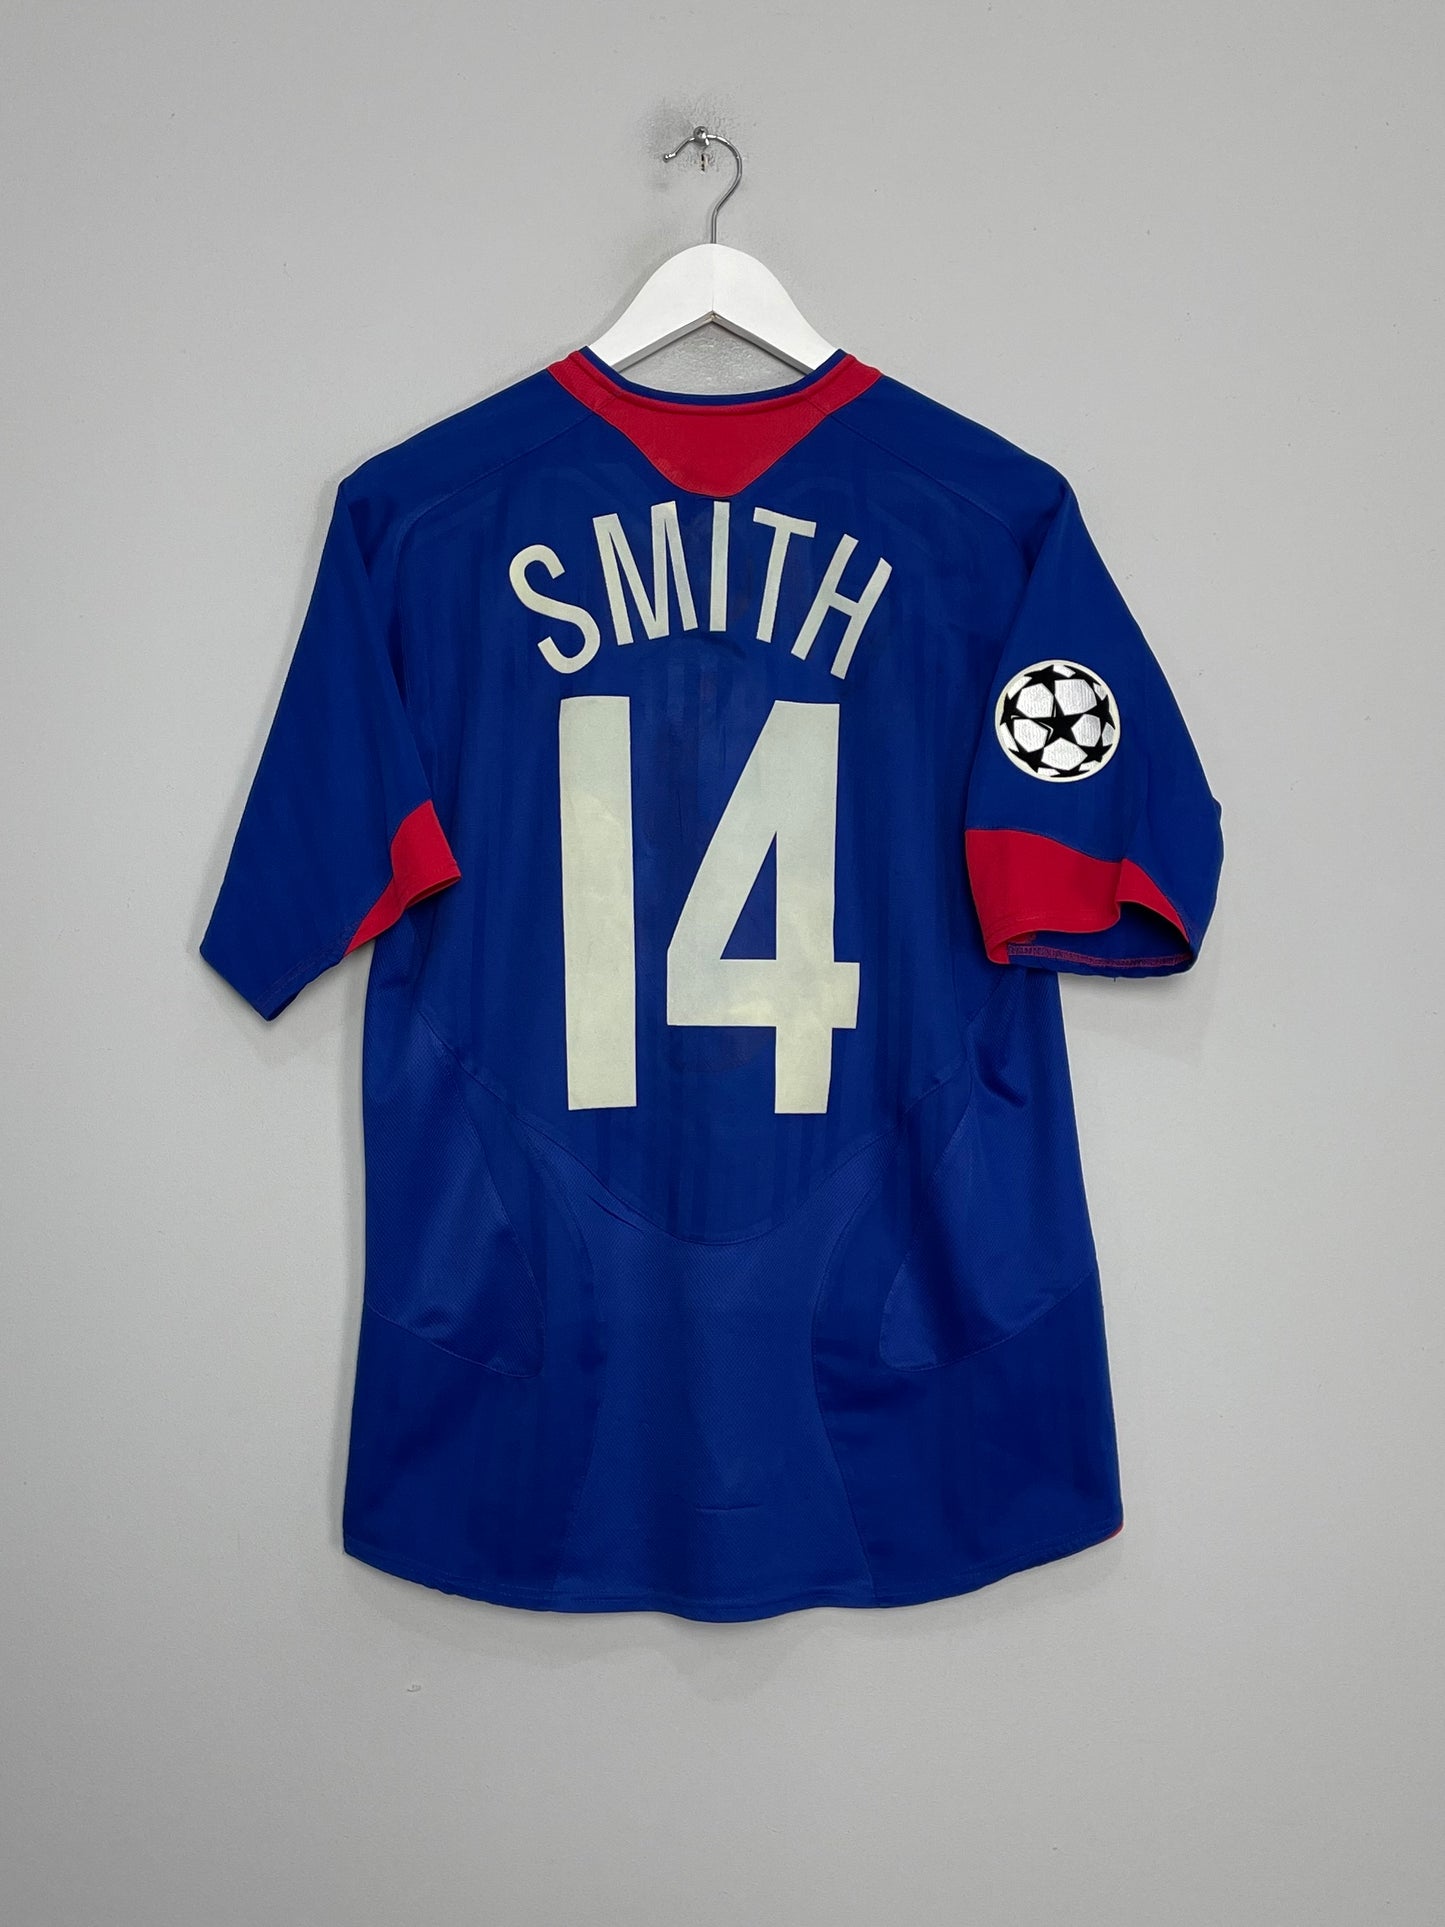 2005/06 MANCHESTER UNITED SMITH #14 C/L AWAY SHIRT (S) NIKE